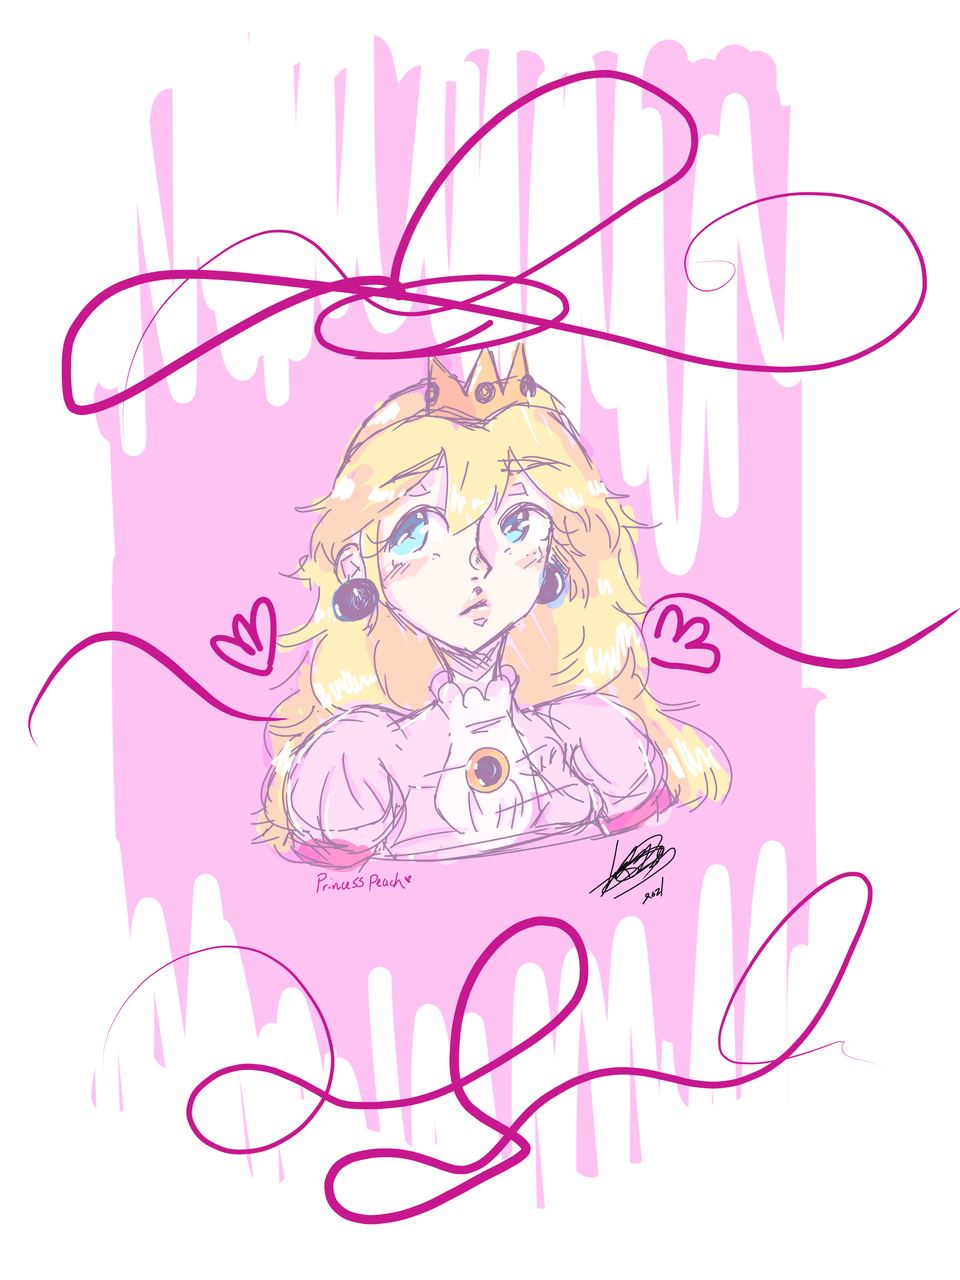 A drawing of princess peach with hearts around her - Princess Peach